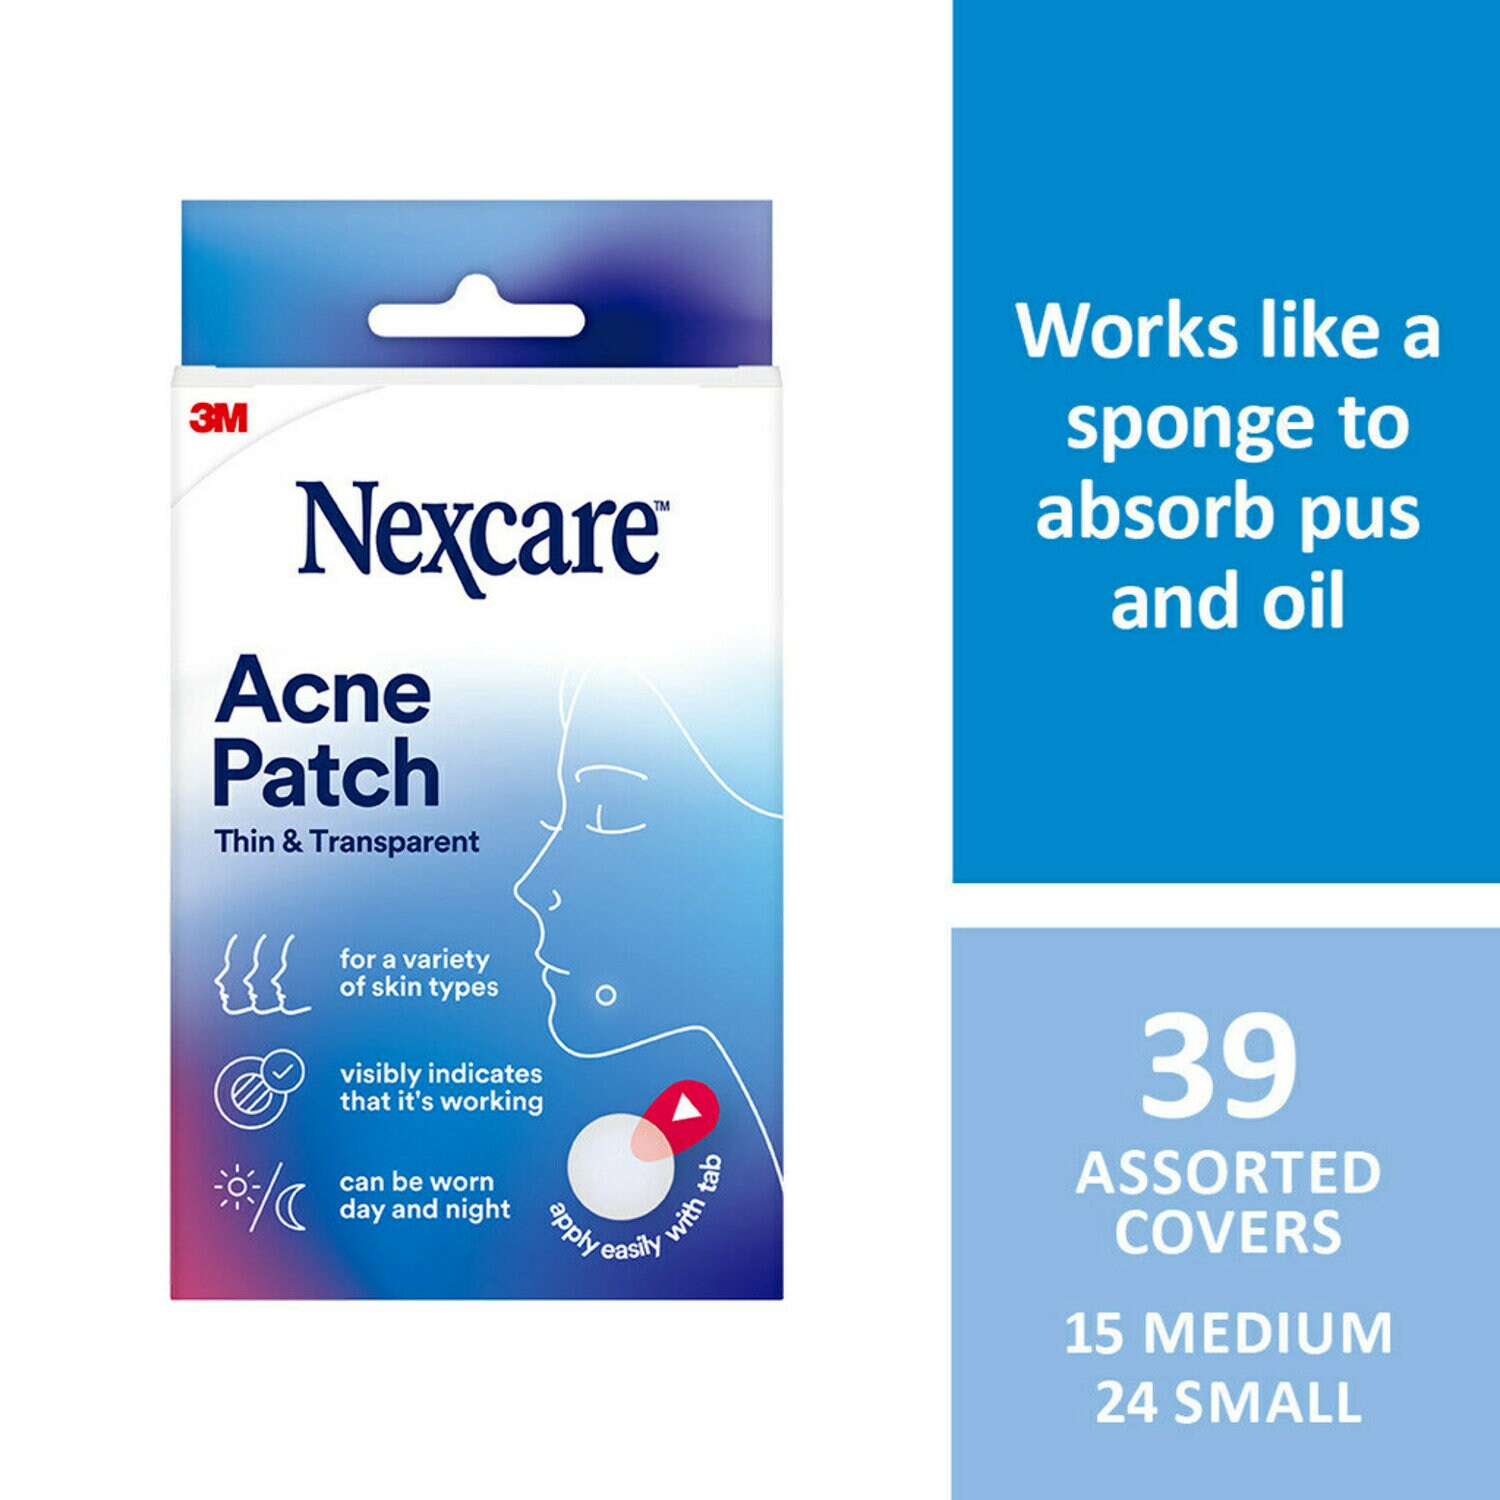 7100291575 - Nexcare Thin and Transparent Acne Patch BA-039, 1x15x12mm+1x24x10mm, 30 Pack/Case